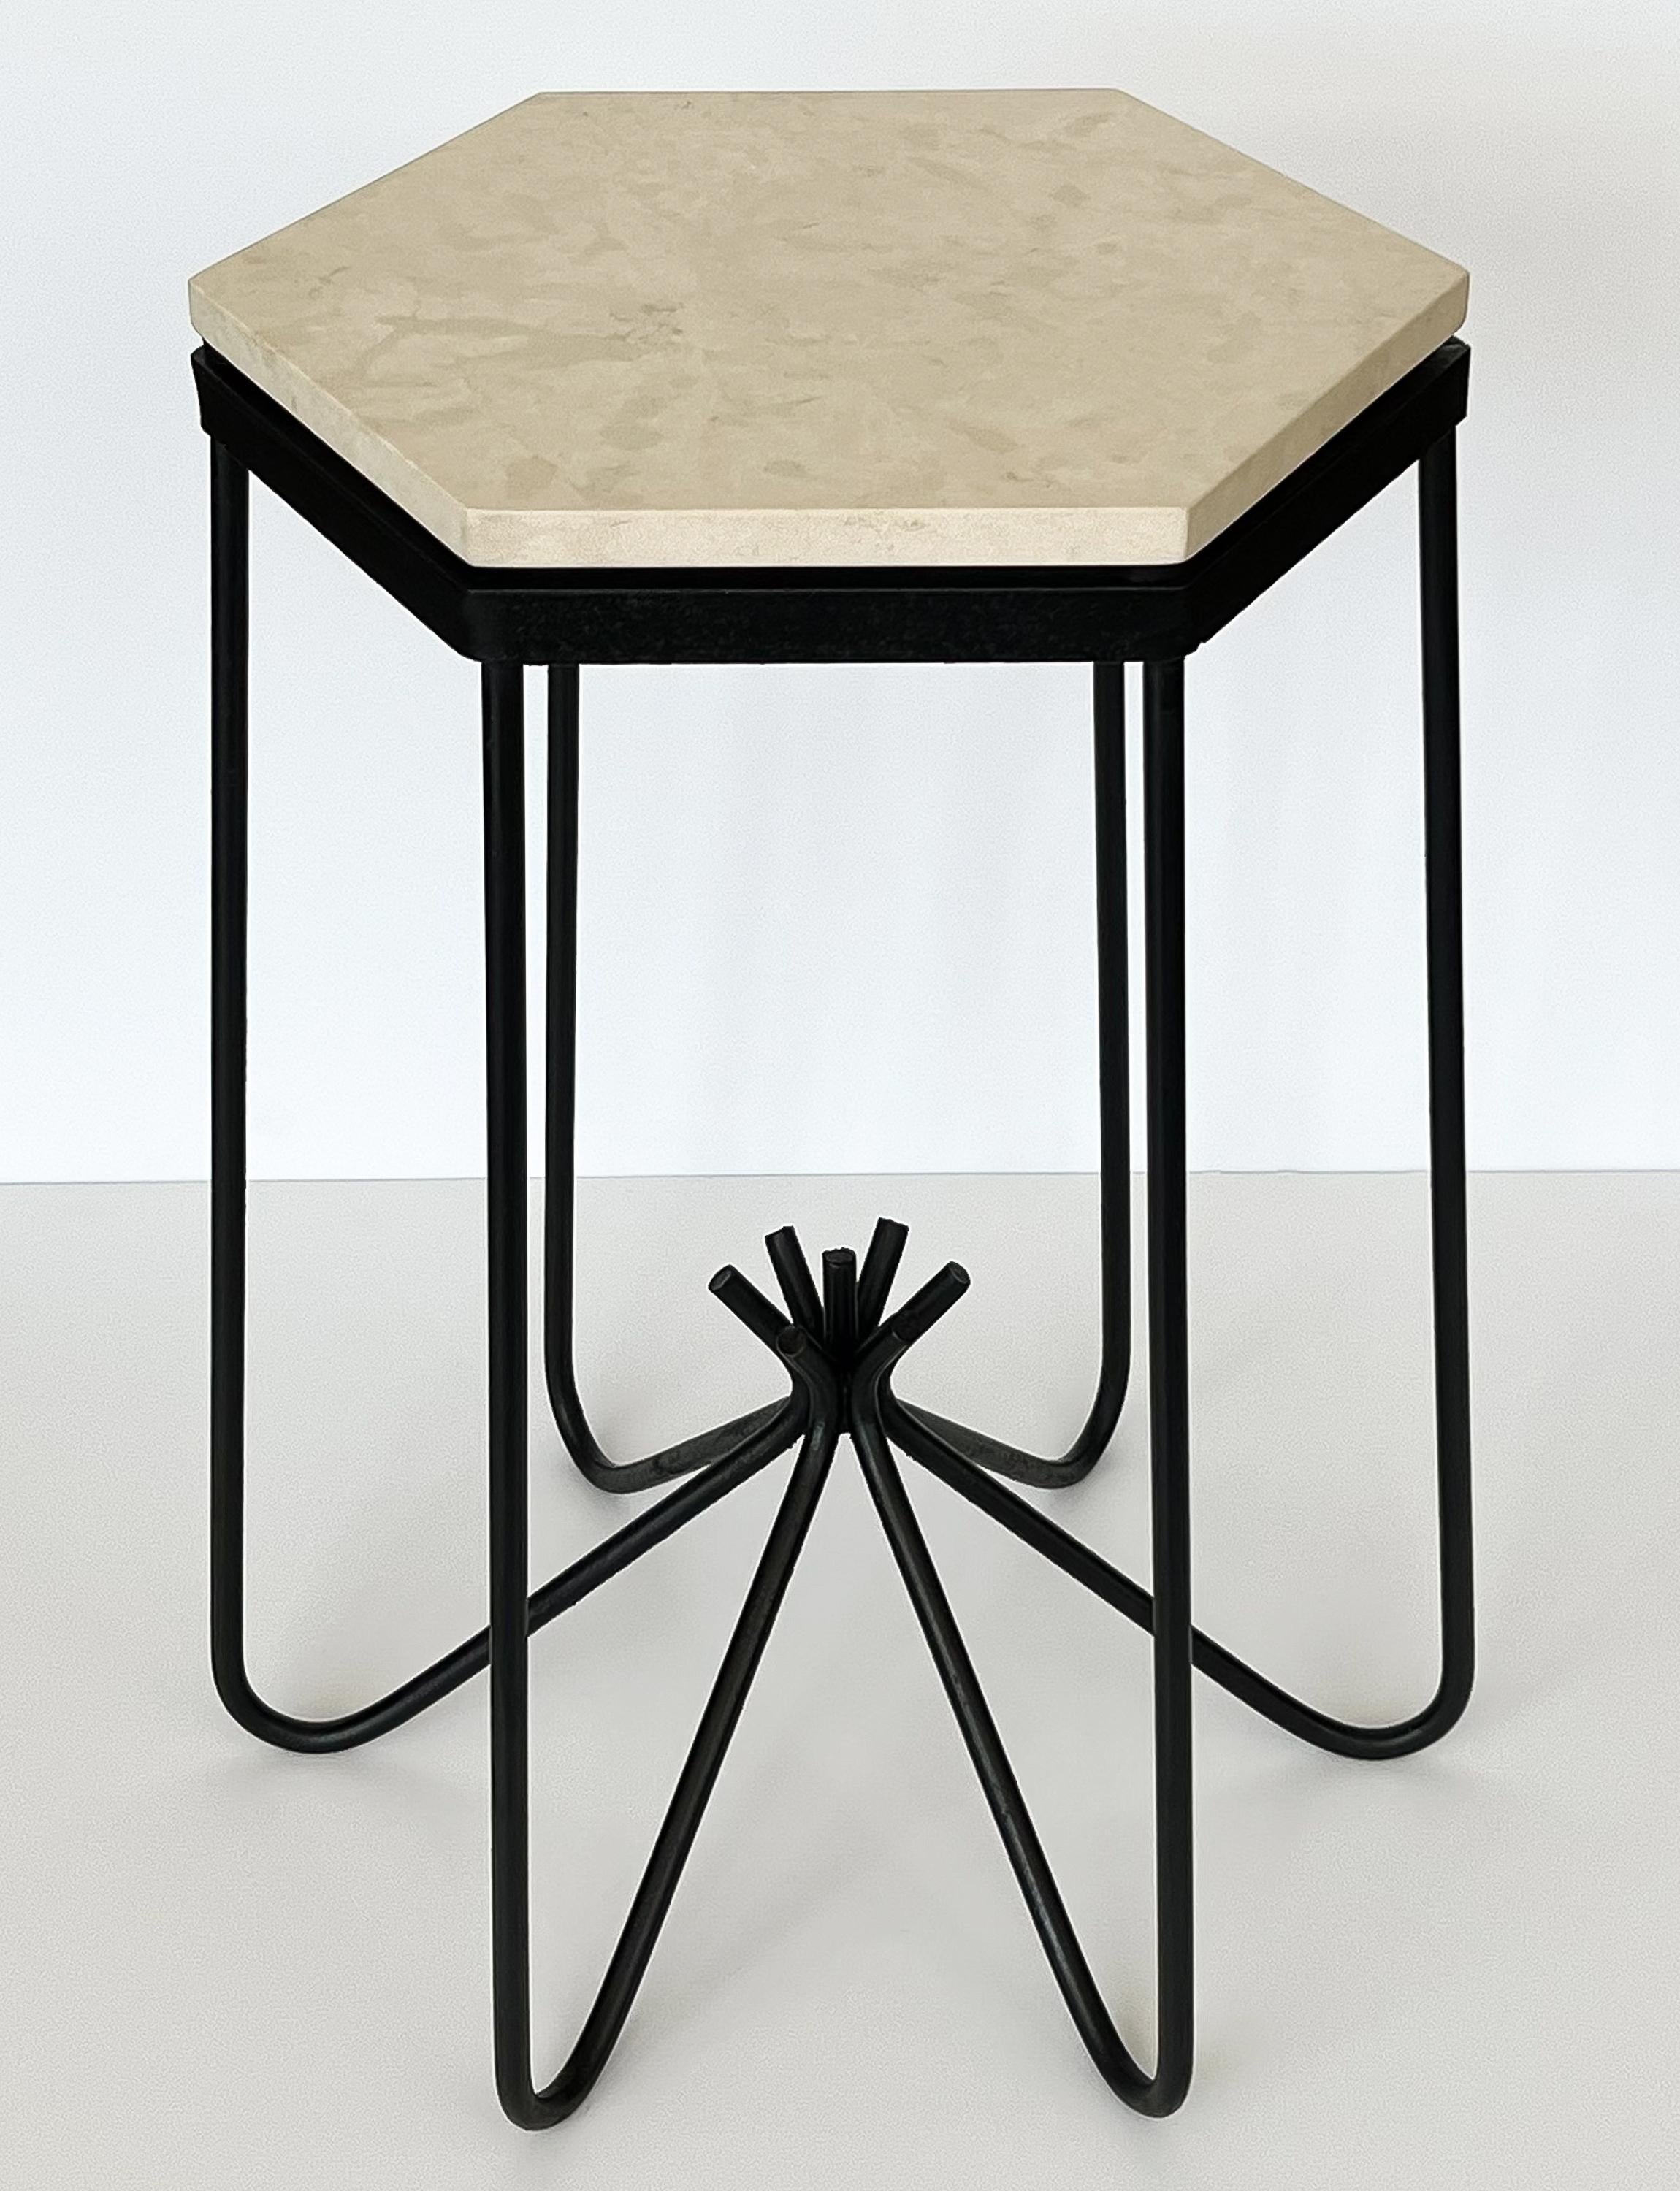 Hirondelle side table in the style of Jean Royère, circa 1950s. This occasional side table or pedestal features a blackened wrought iron framework with a hexagonal cream limestone top. Honed finish to limestone top. Sculptural hairpin base with